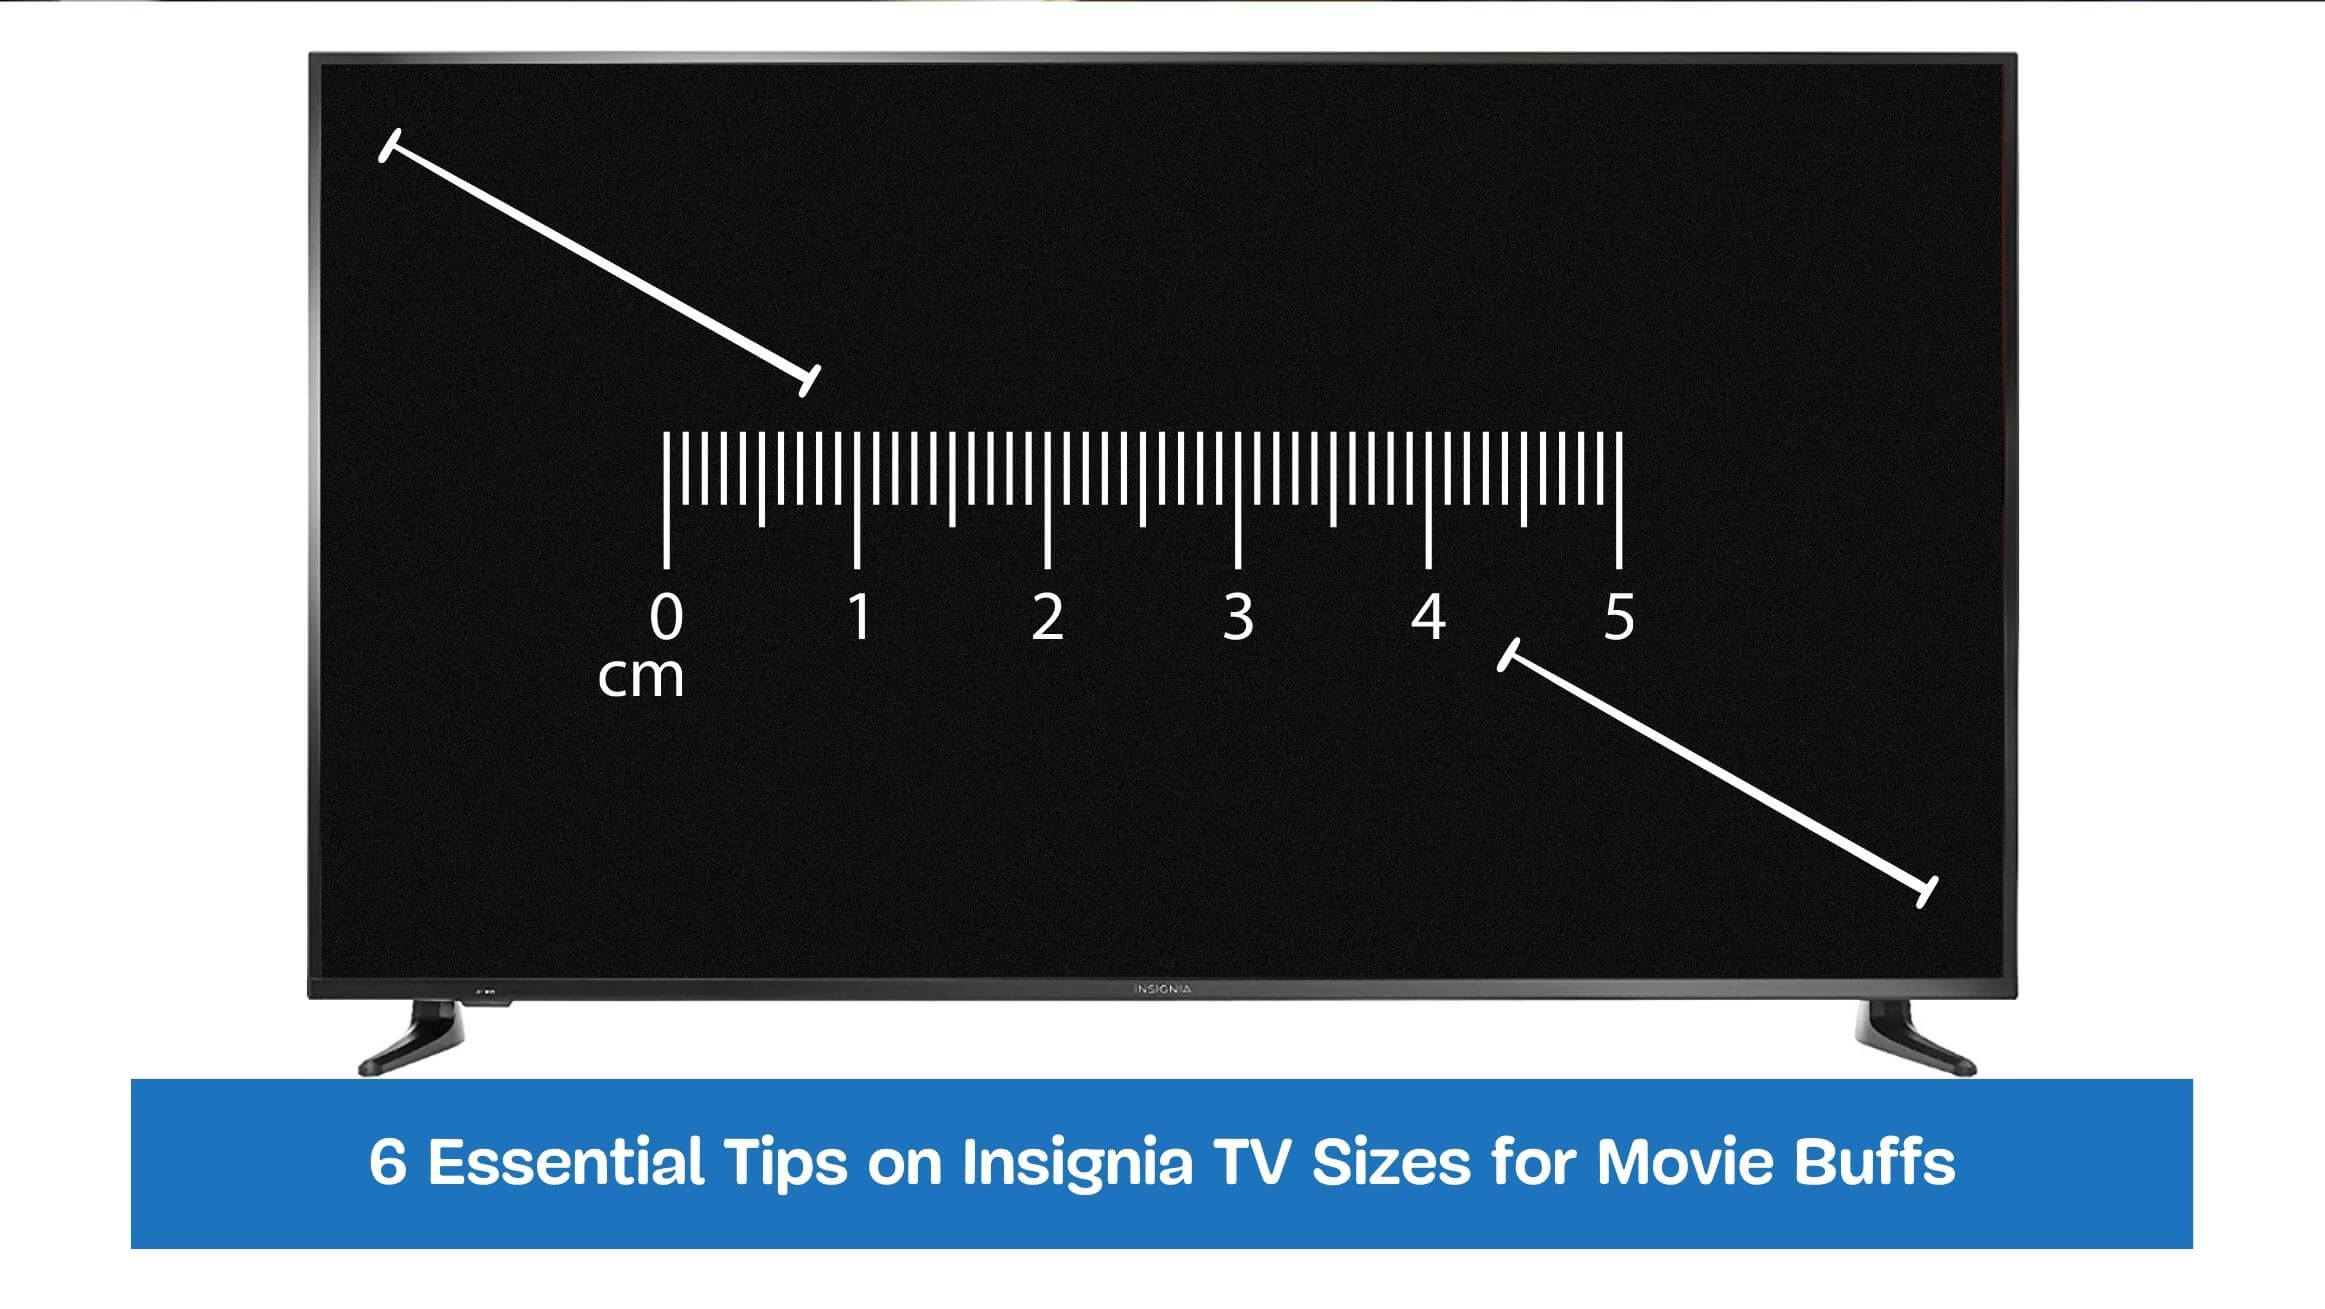 6 Essential Tips on Insignia TV Sizes for Movie Buffs